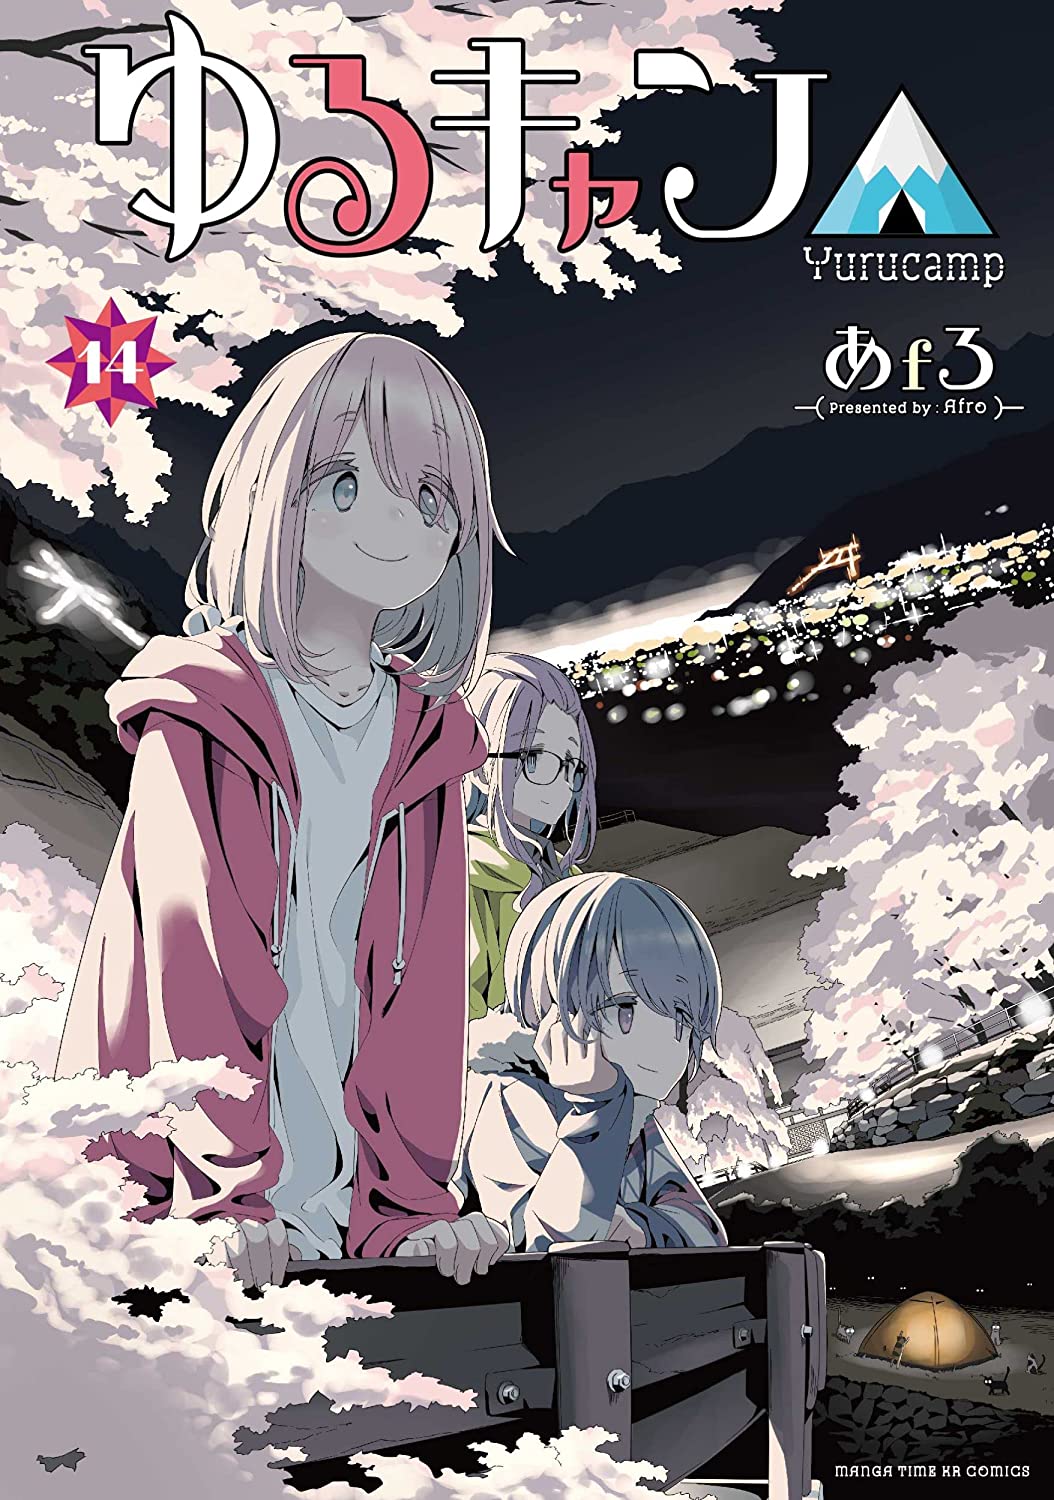 Bocchi the Rock Manga Gets English Release by Yen Press, Releases in Fall  2023 - Anime Corner